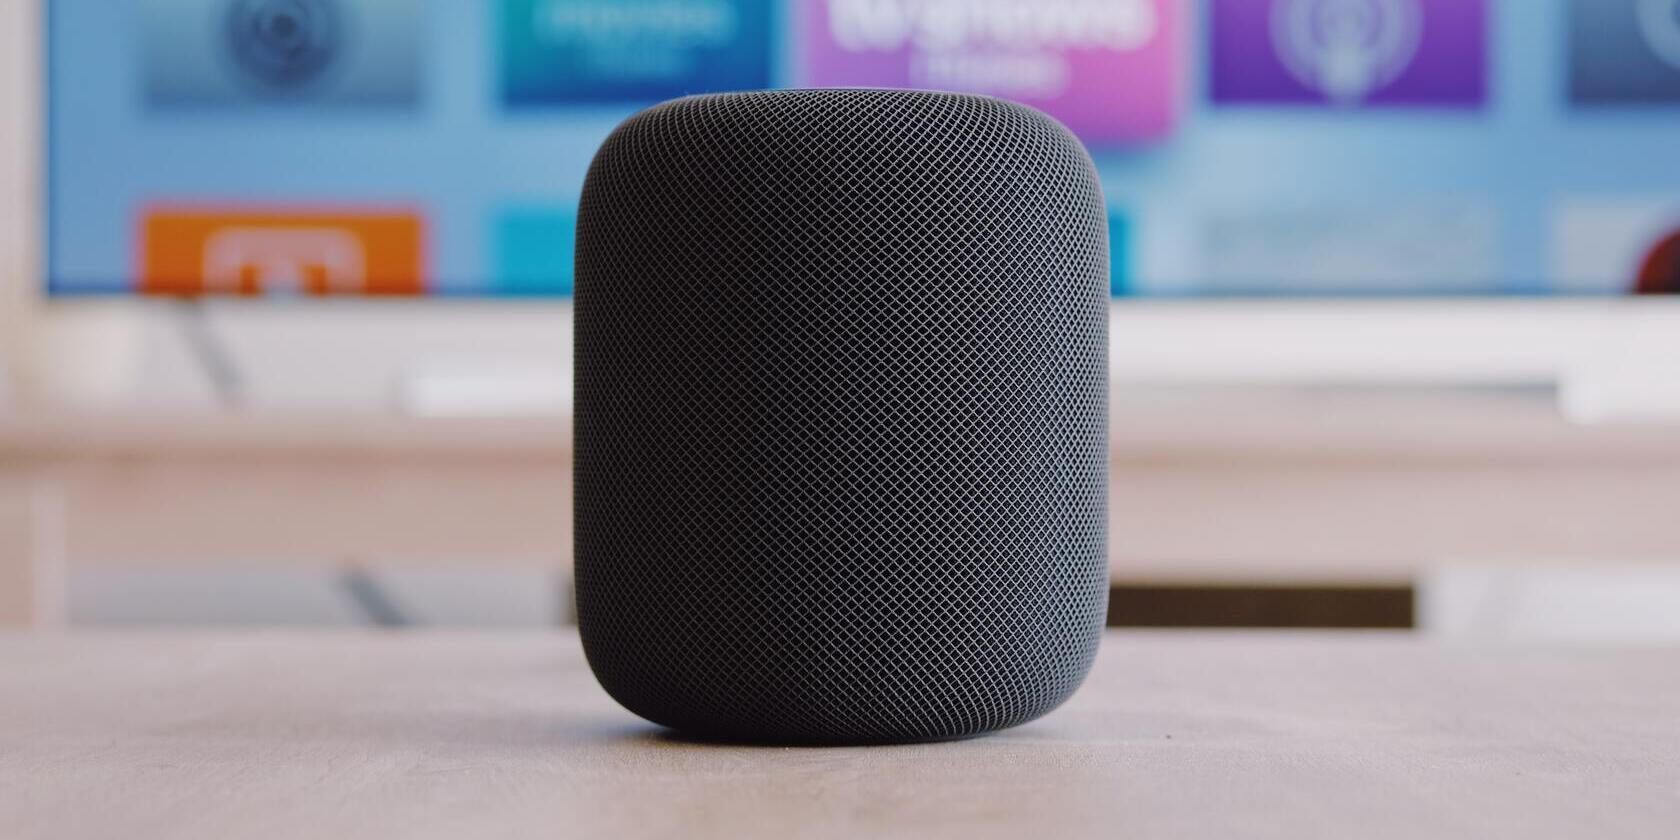 Black HomePod on a table in front of a TV